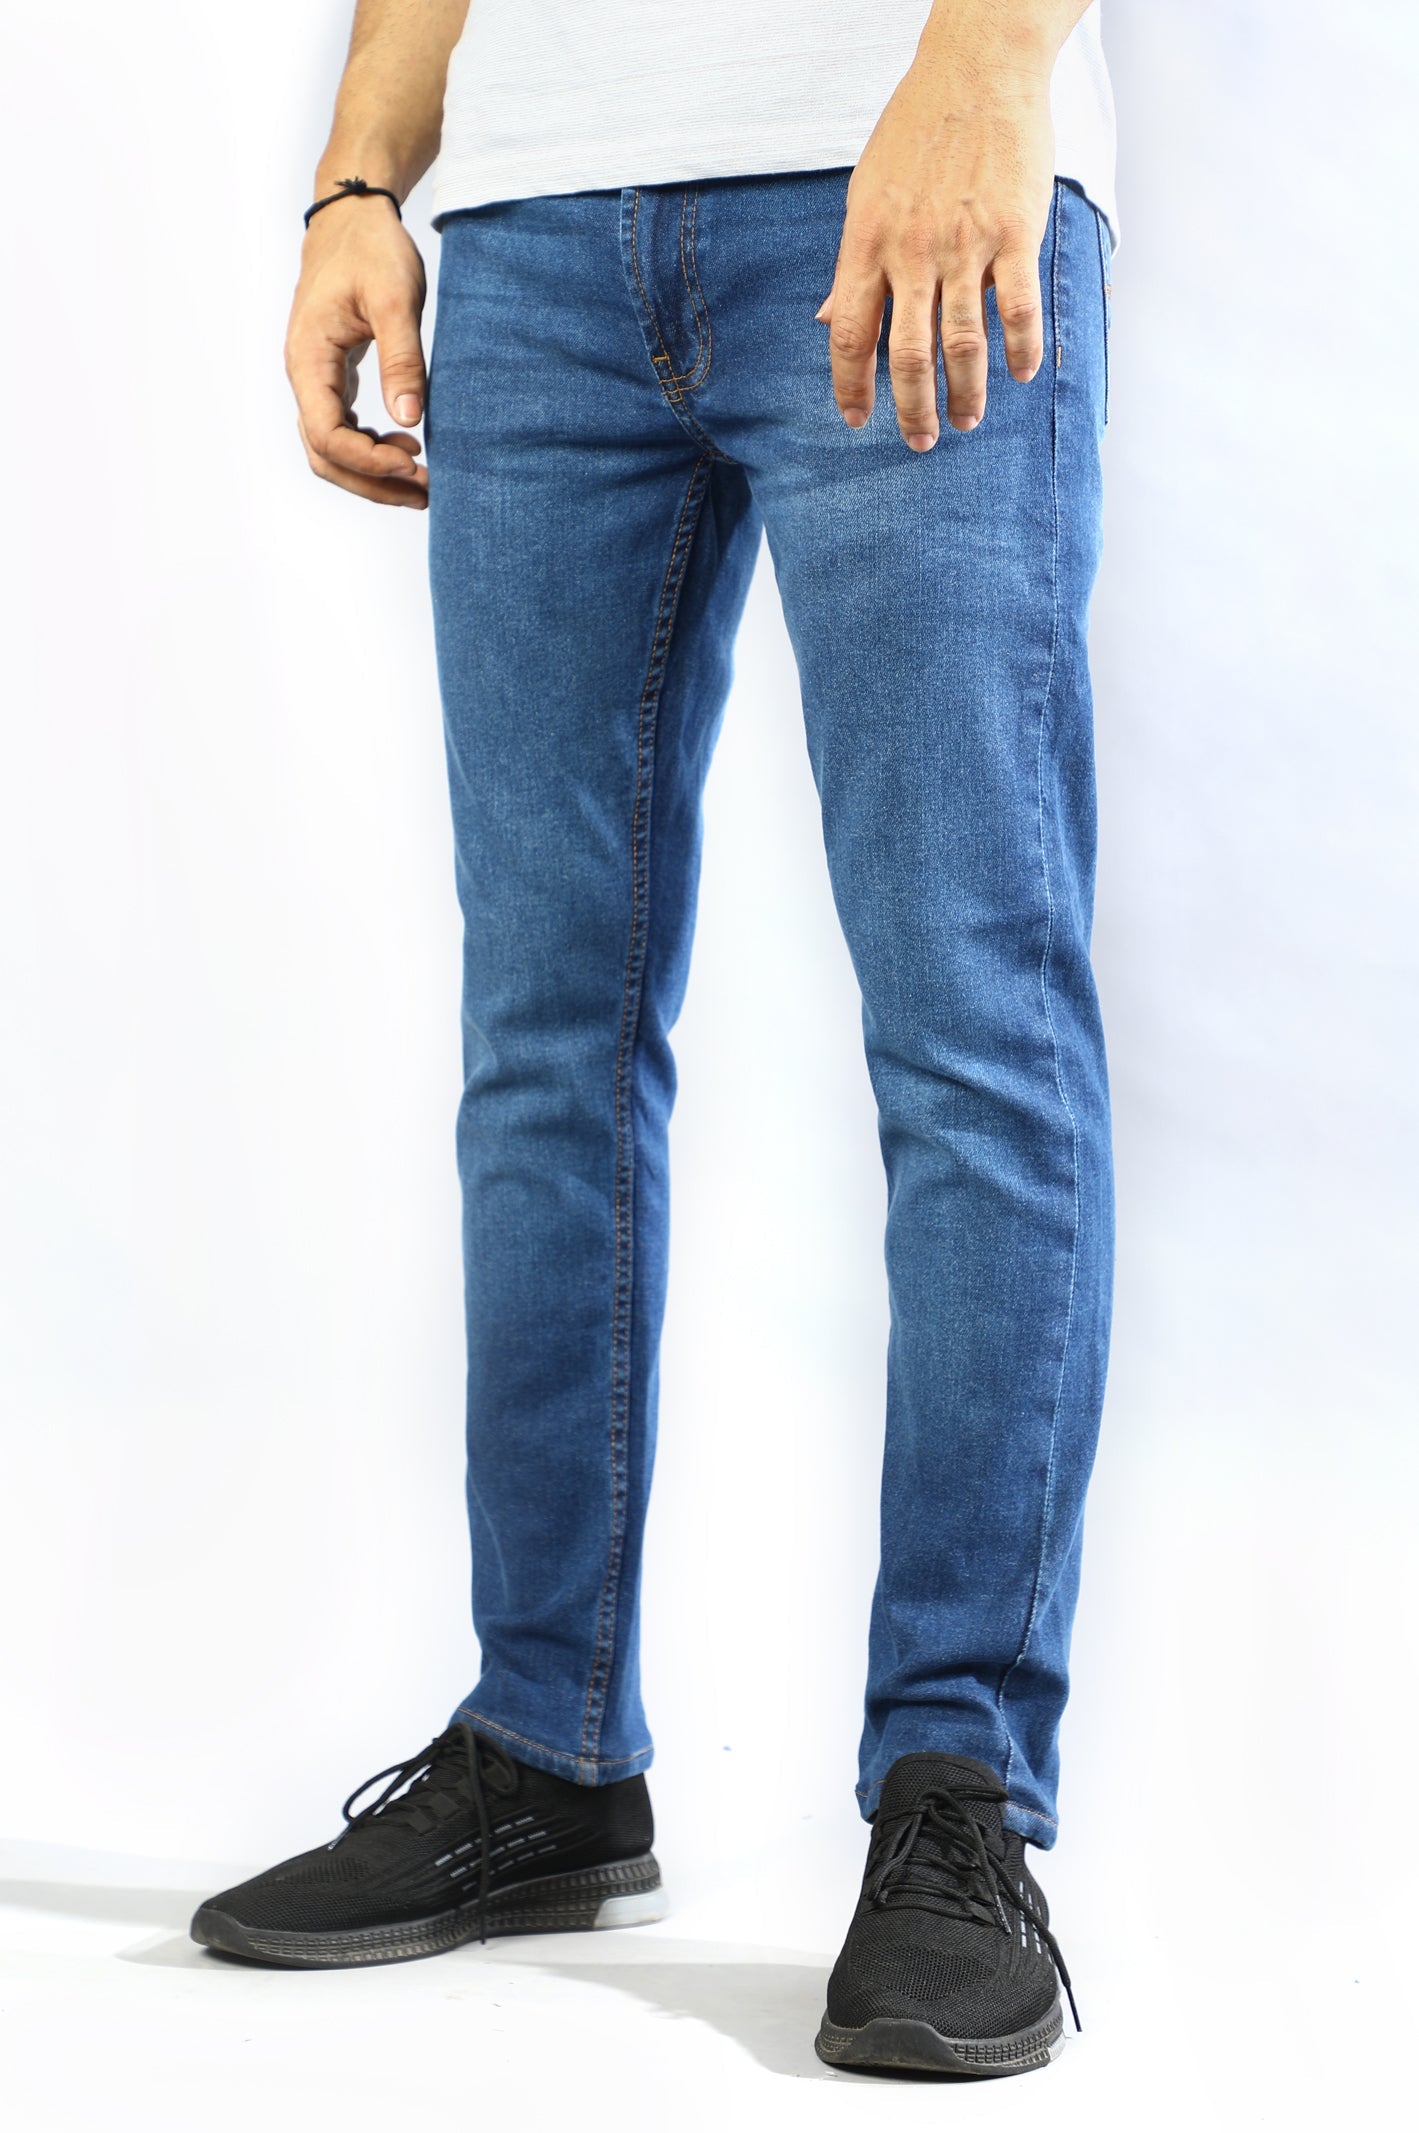 Indigo Smart Fit Jeans From Diners